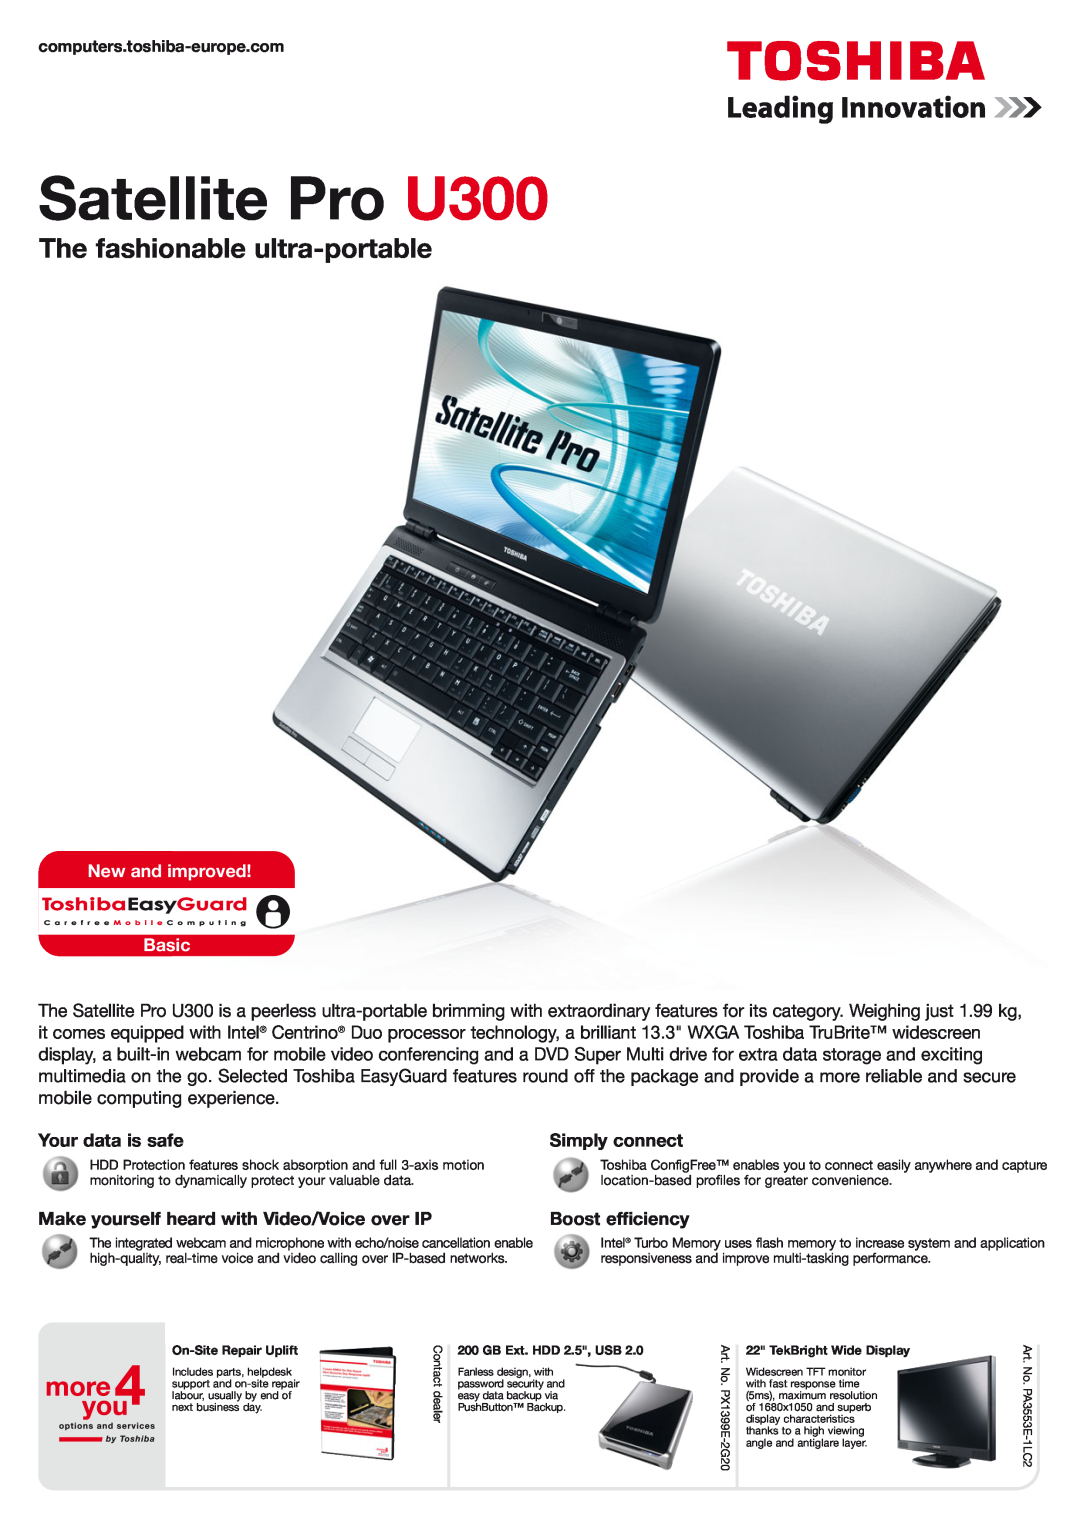 Toshiba manual Satellite Pro U300, The fashionable ultra-portable, New and improved Basic, Your data is safe 